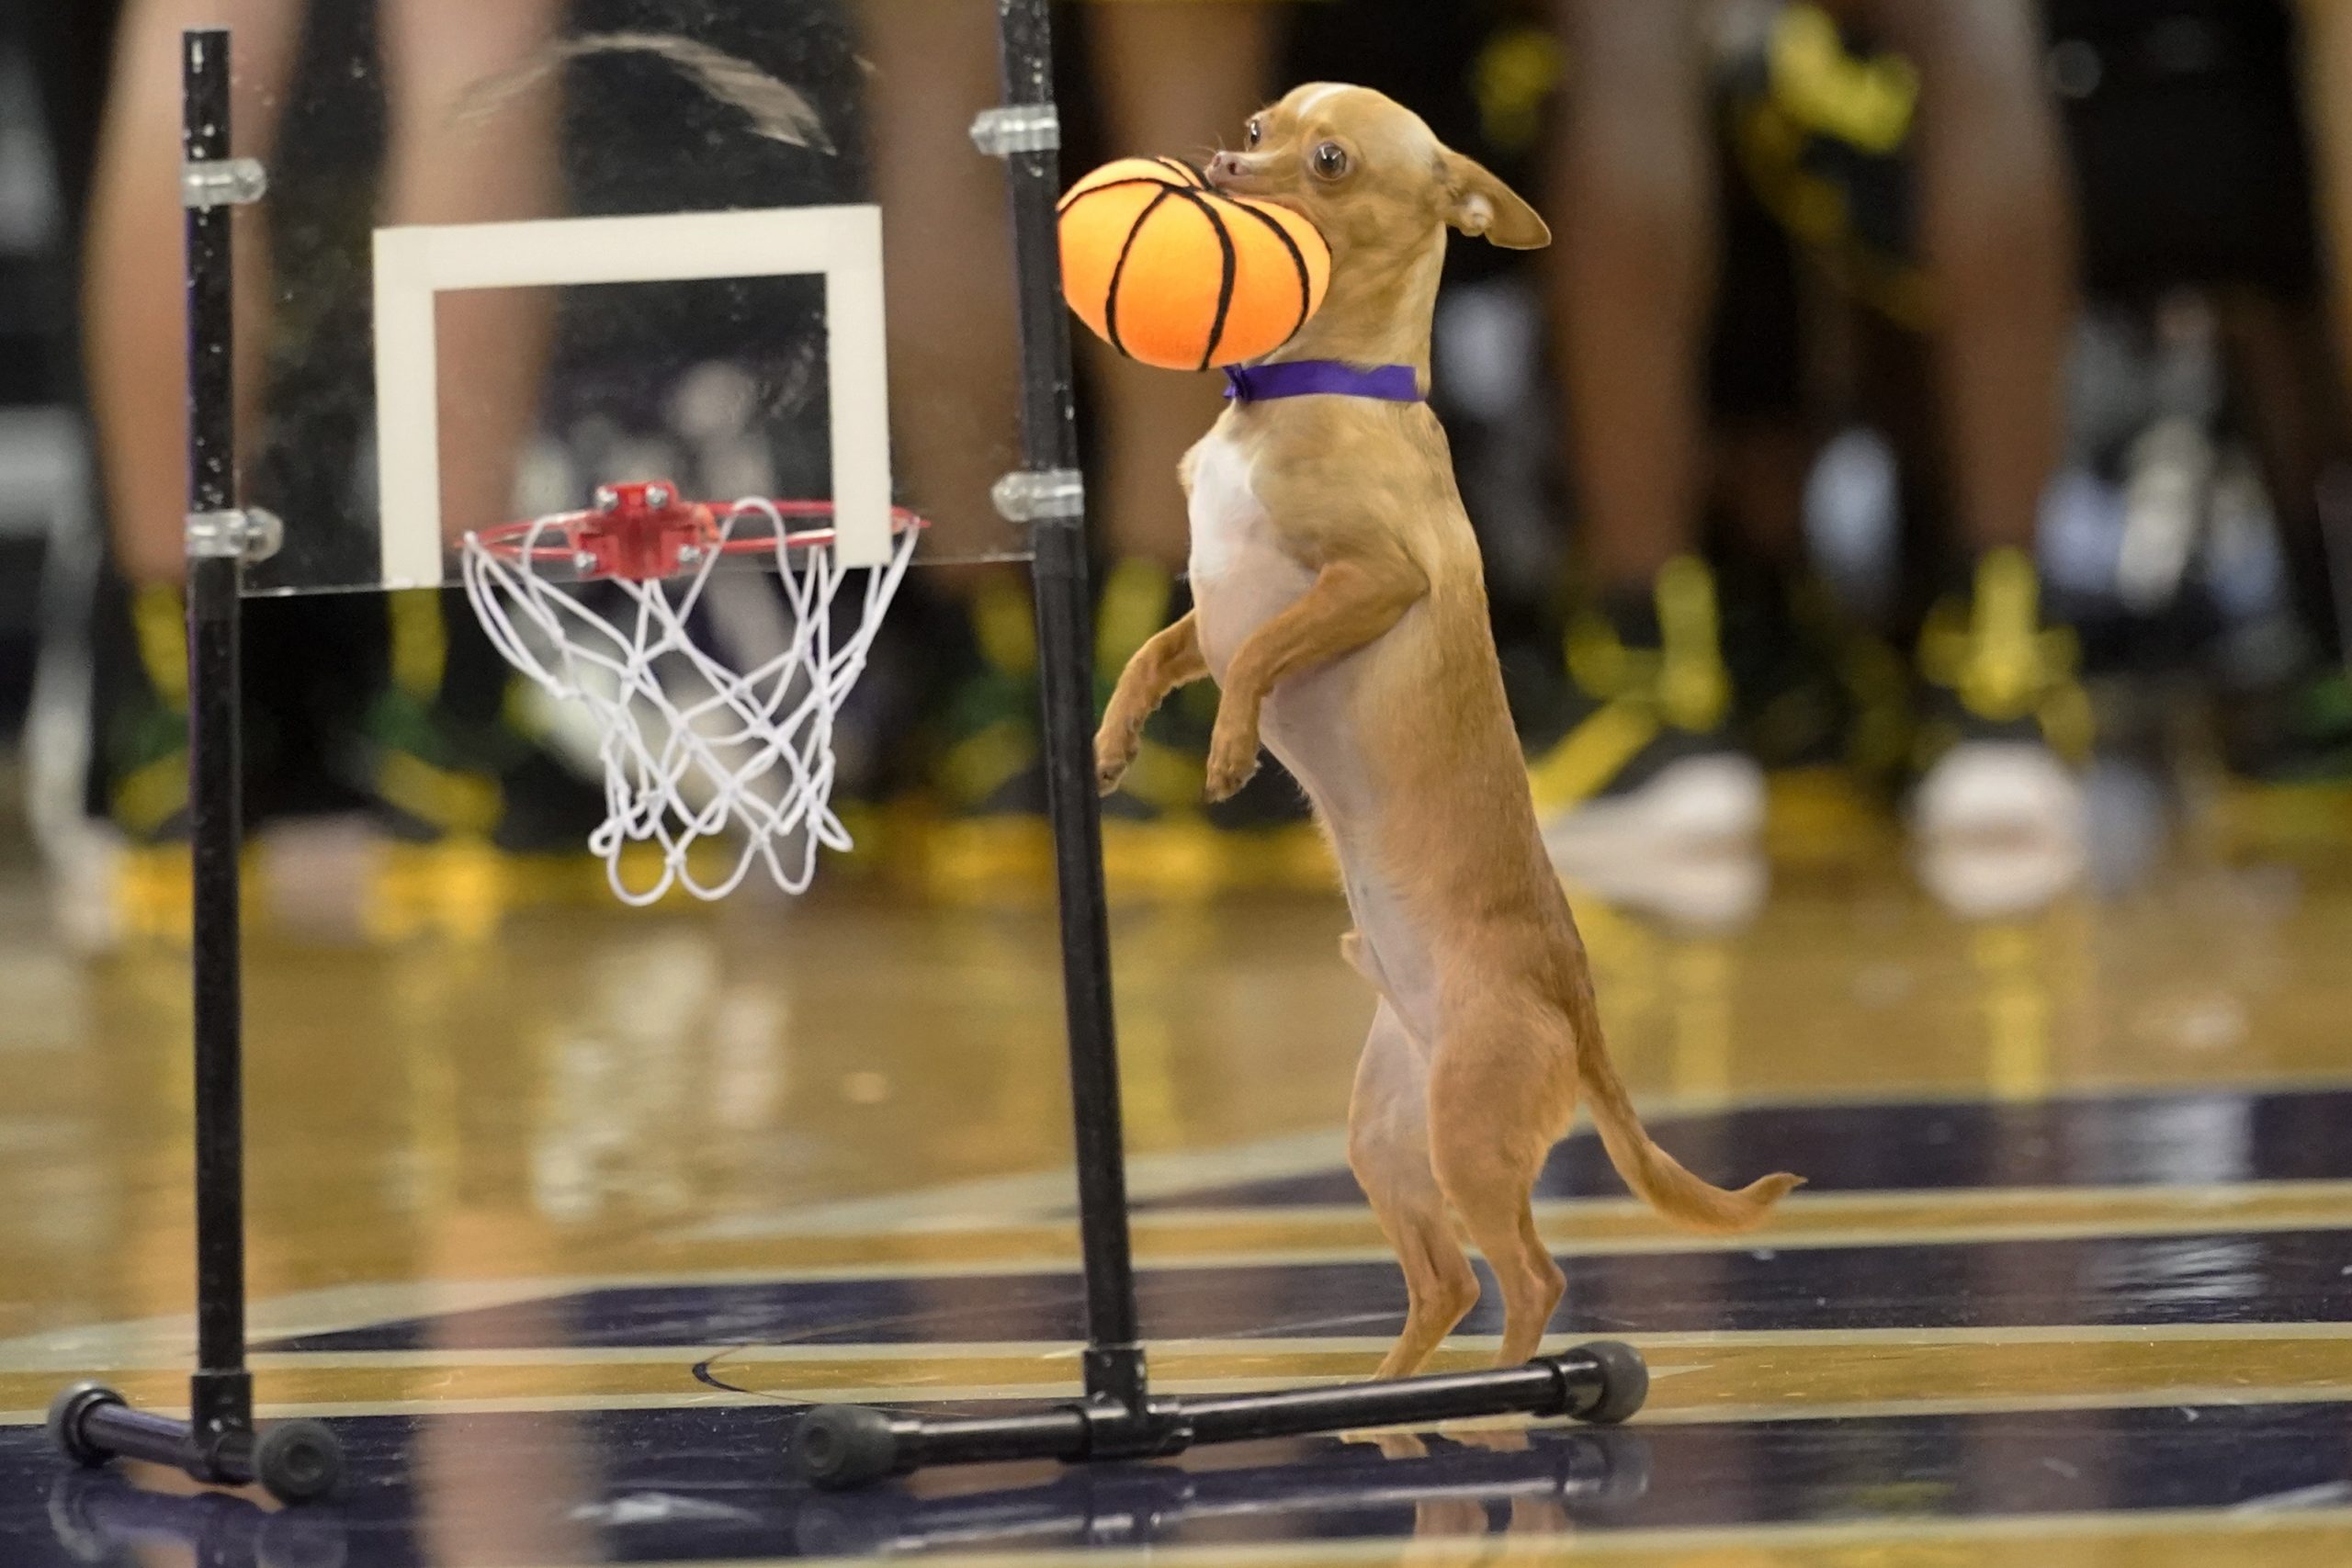 A Chihuahua makes a basket during a break in the action in the second half of an NCAA college basketball game between Washington and Oregon,